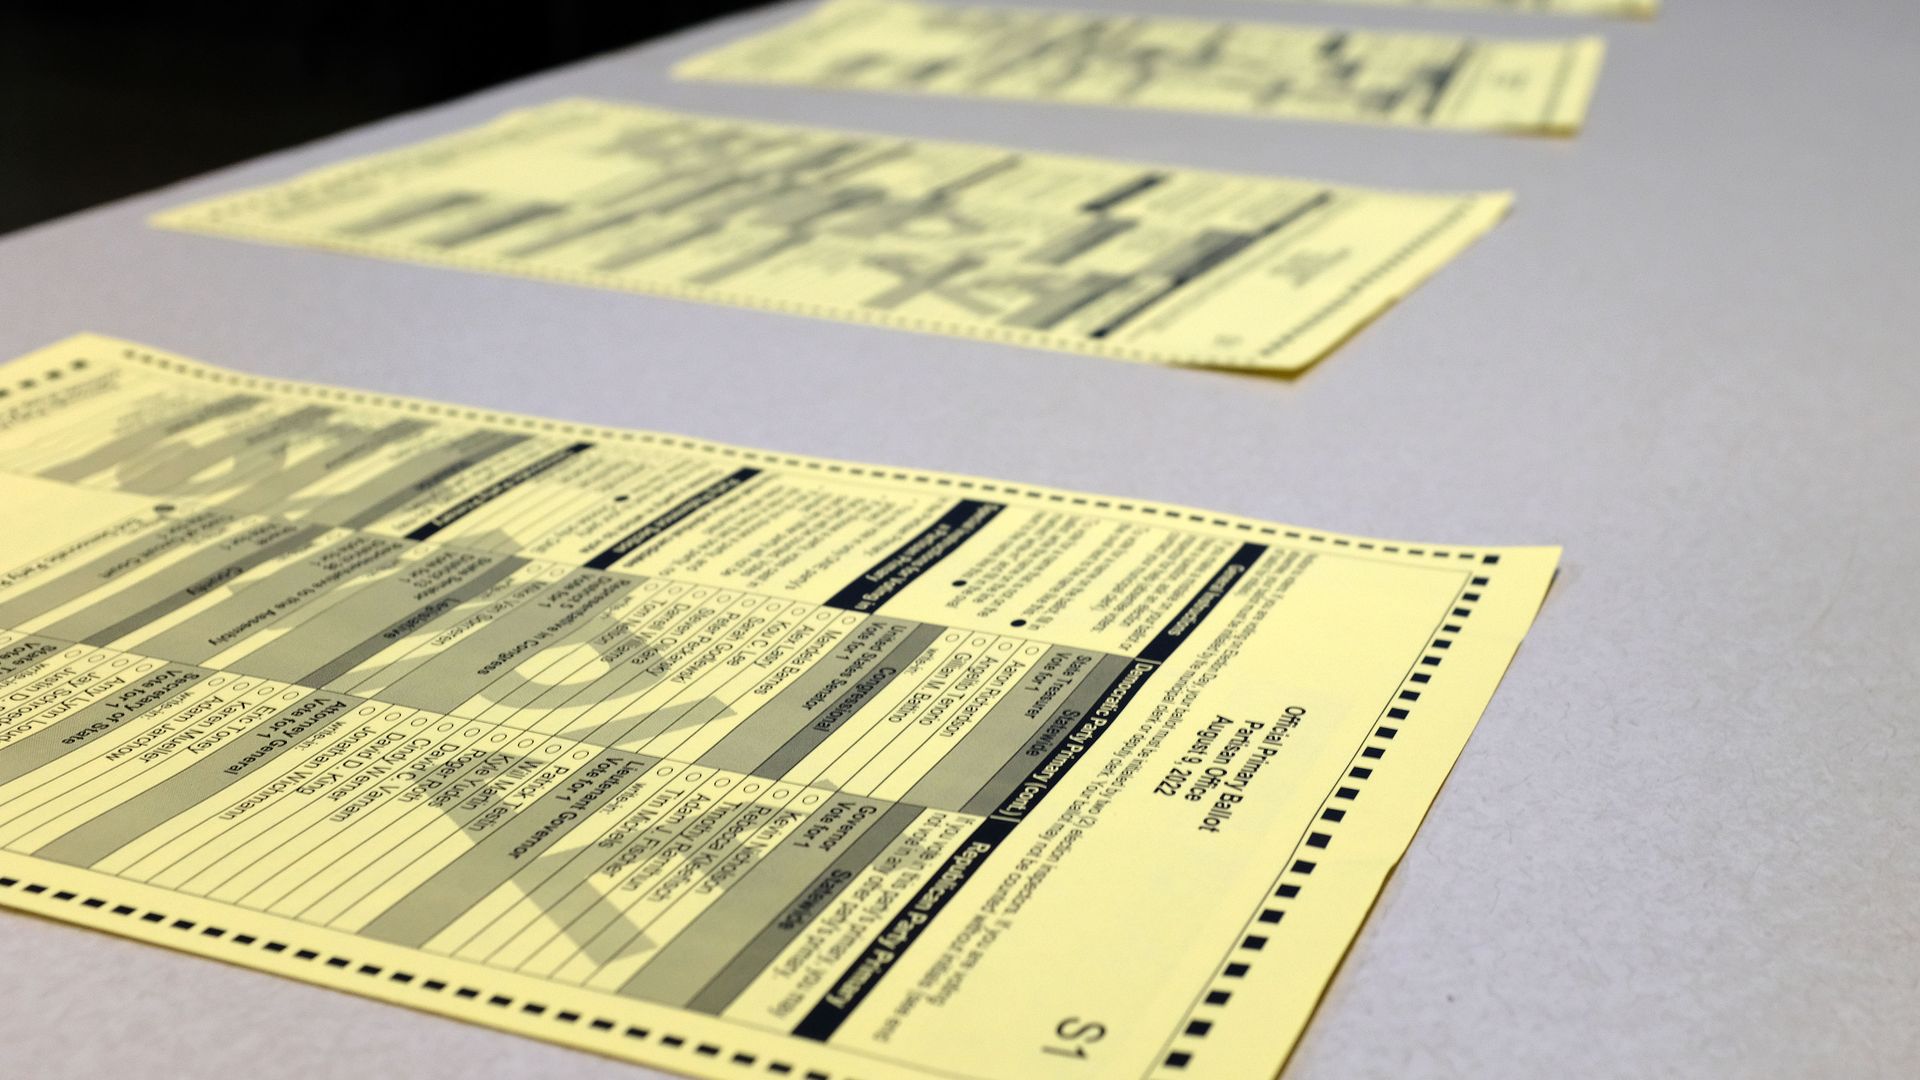 Ballots are distributed for use on Wisconsins state primary day on August 9, 2022 at Concord Community Center in Sullivan, WI.